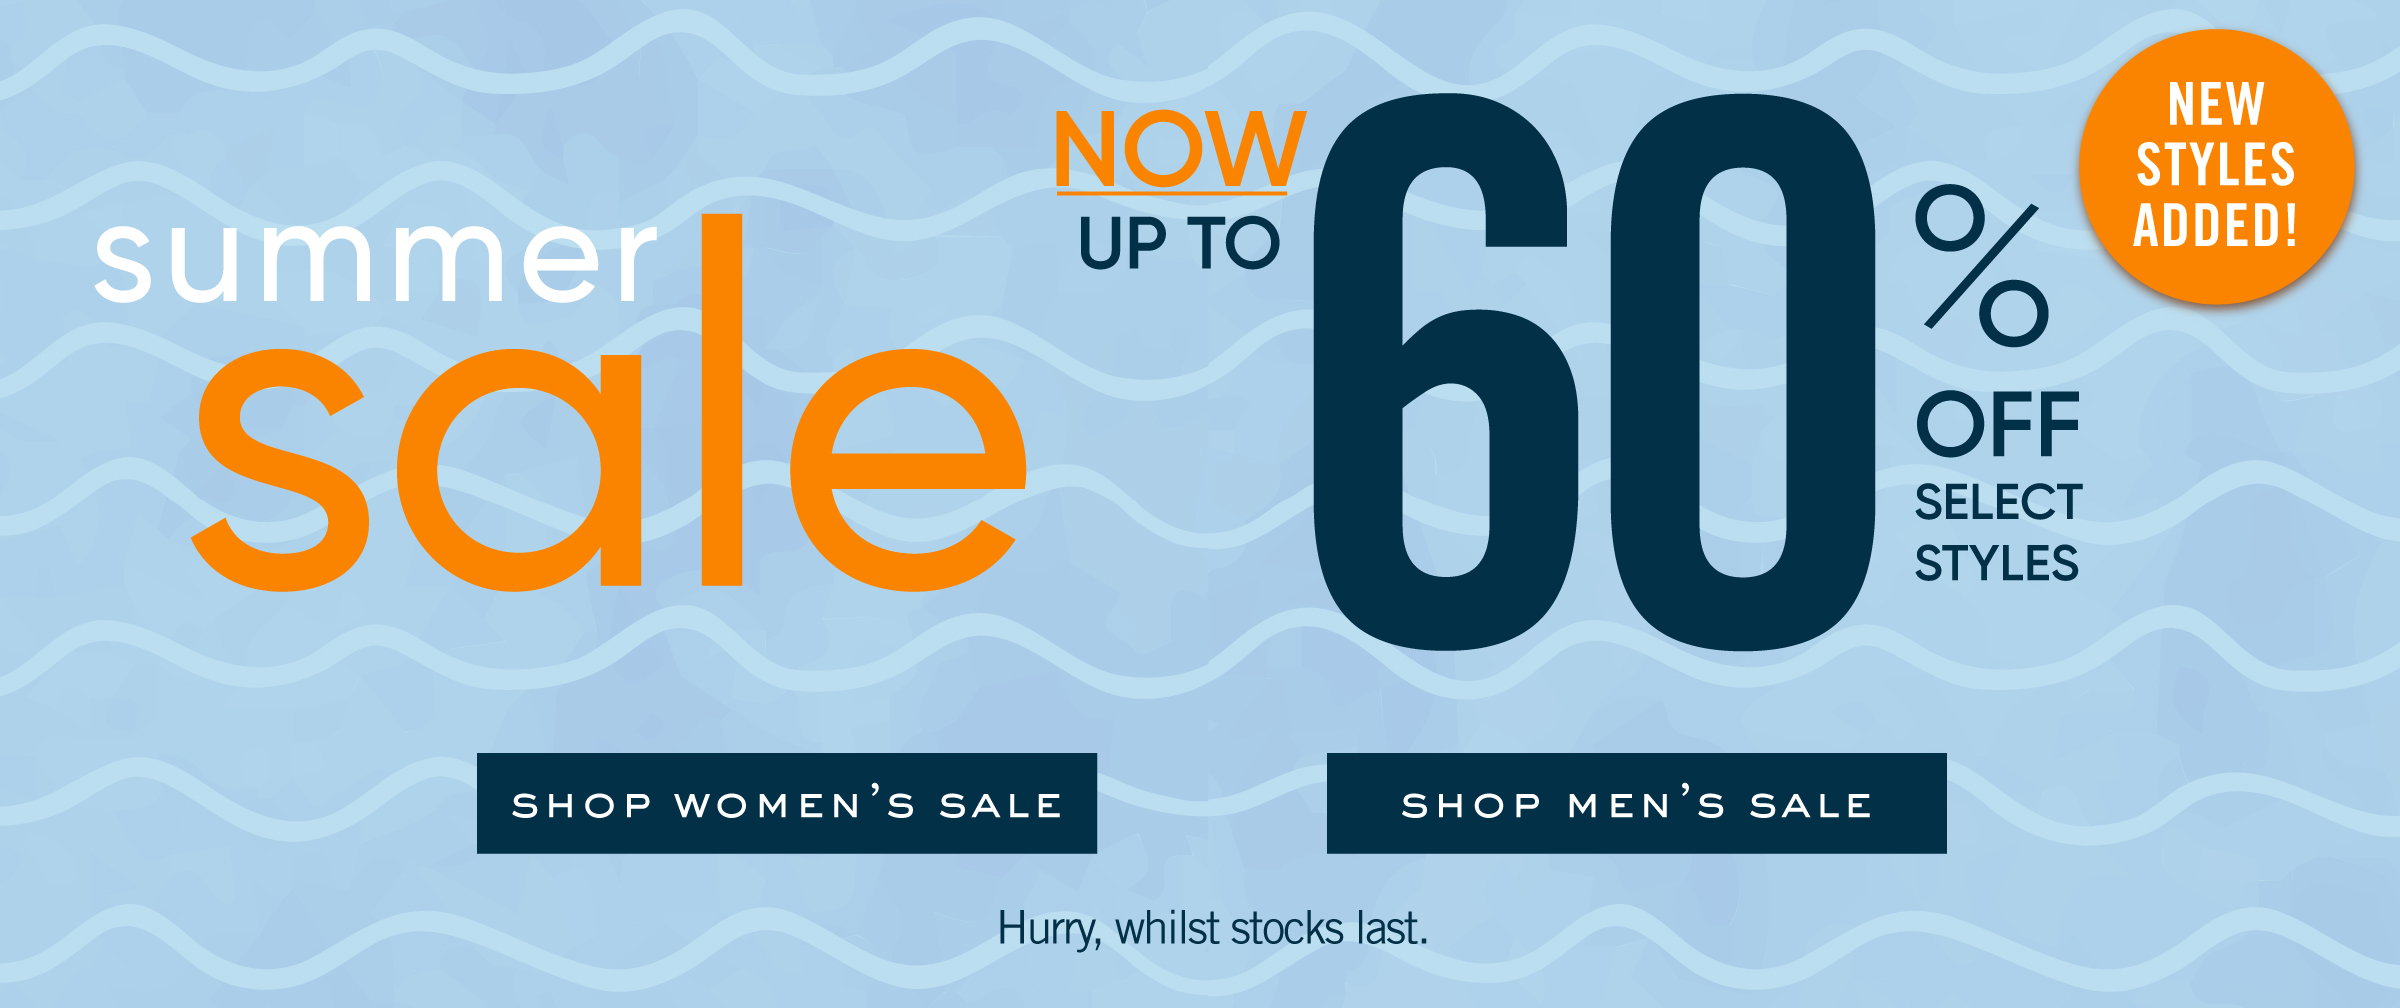 Summer Sale Up to 60% OFF - New Lines Added!